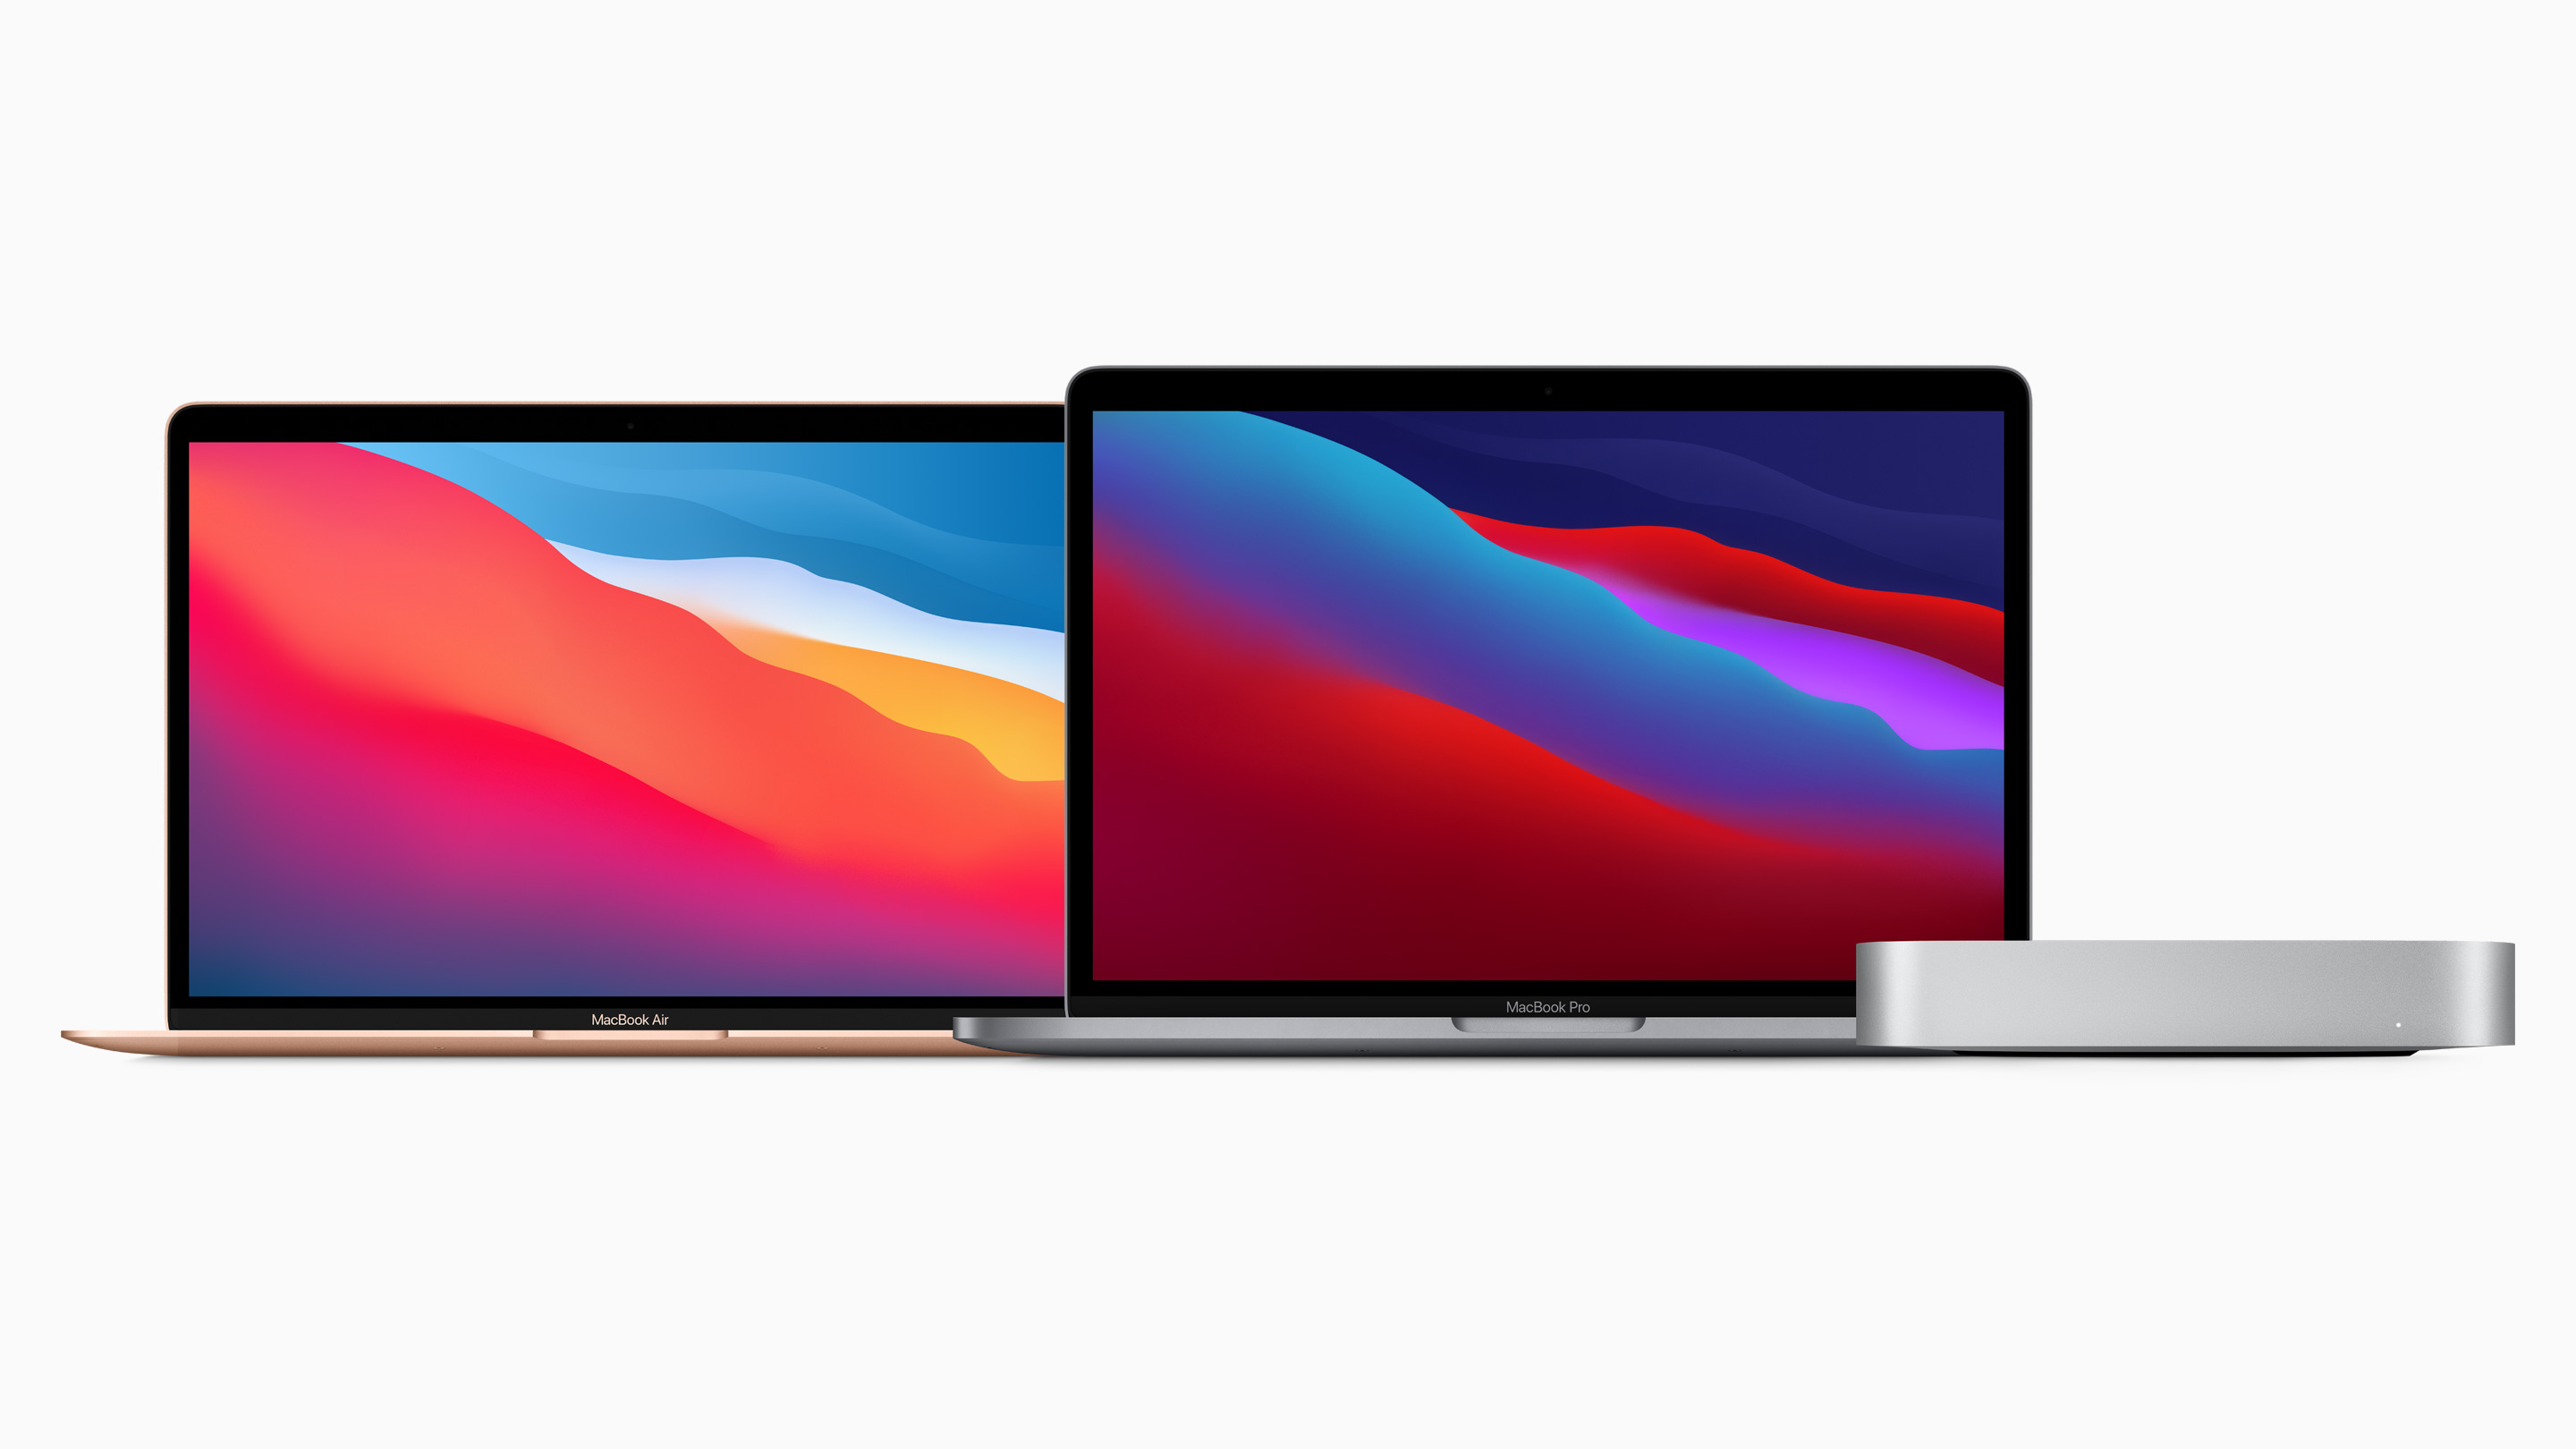 Apple Unveiled Its Fastest Ever Mac Chip M1 Powering the Latest 13-inch MacBook Pro, Mac Mini and MacBook Air 